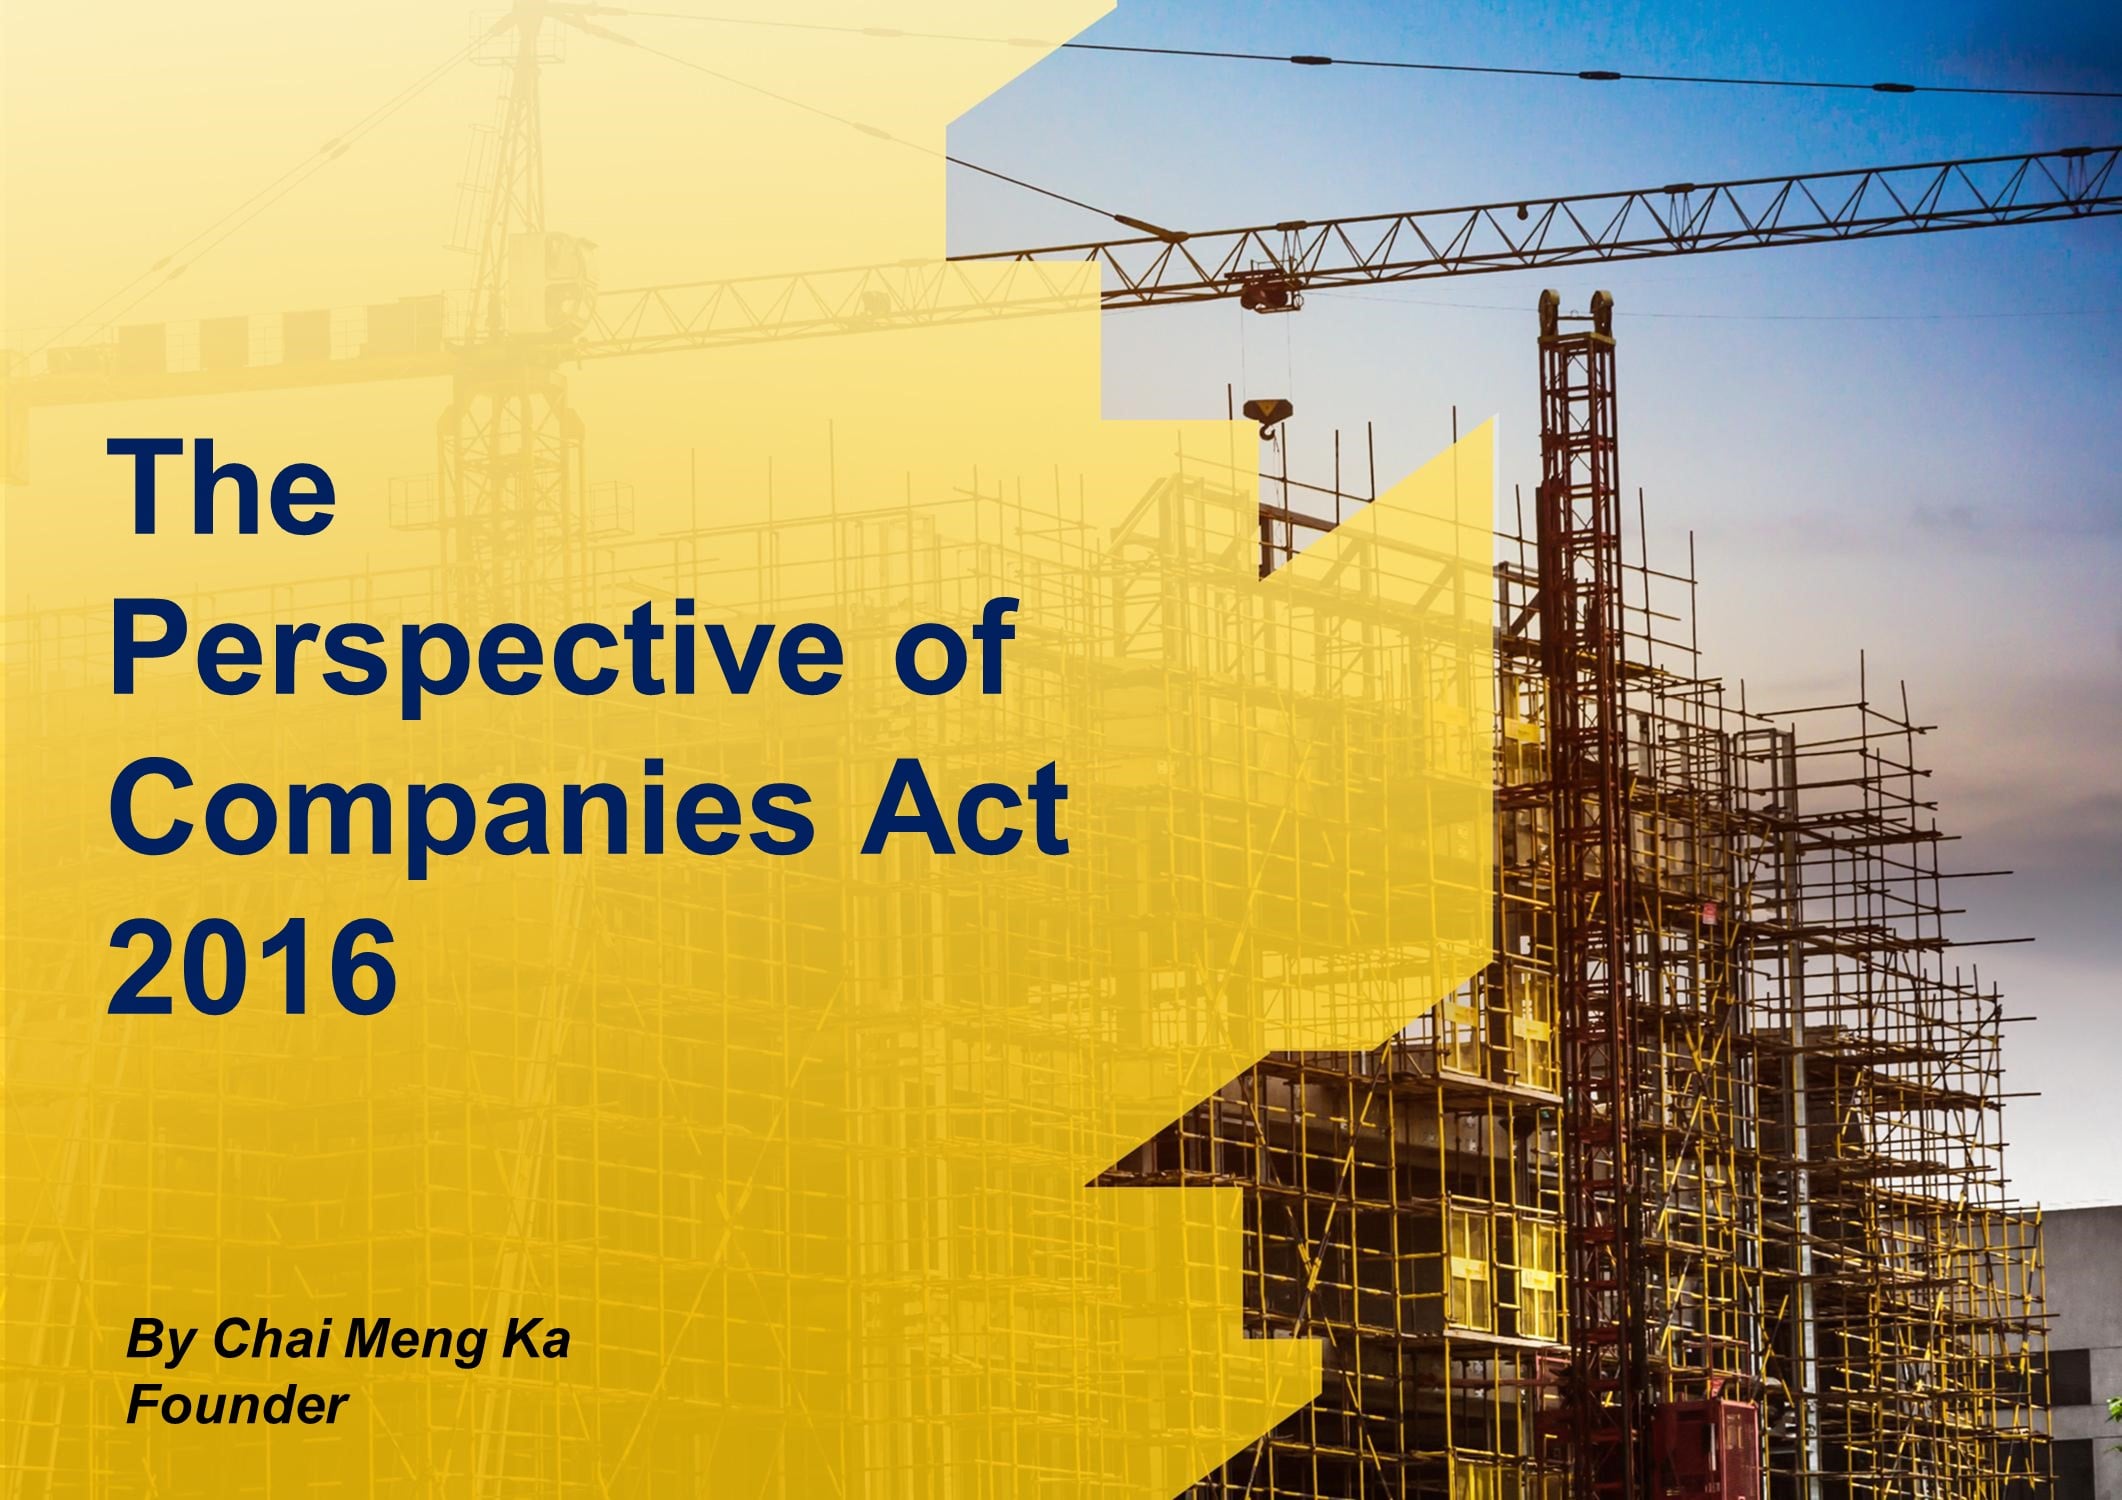 The Perspective of Companies Act 2016